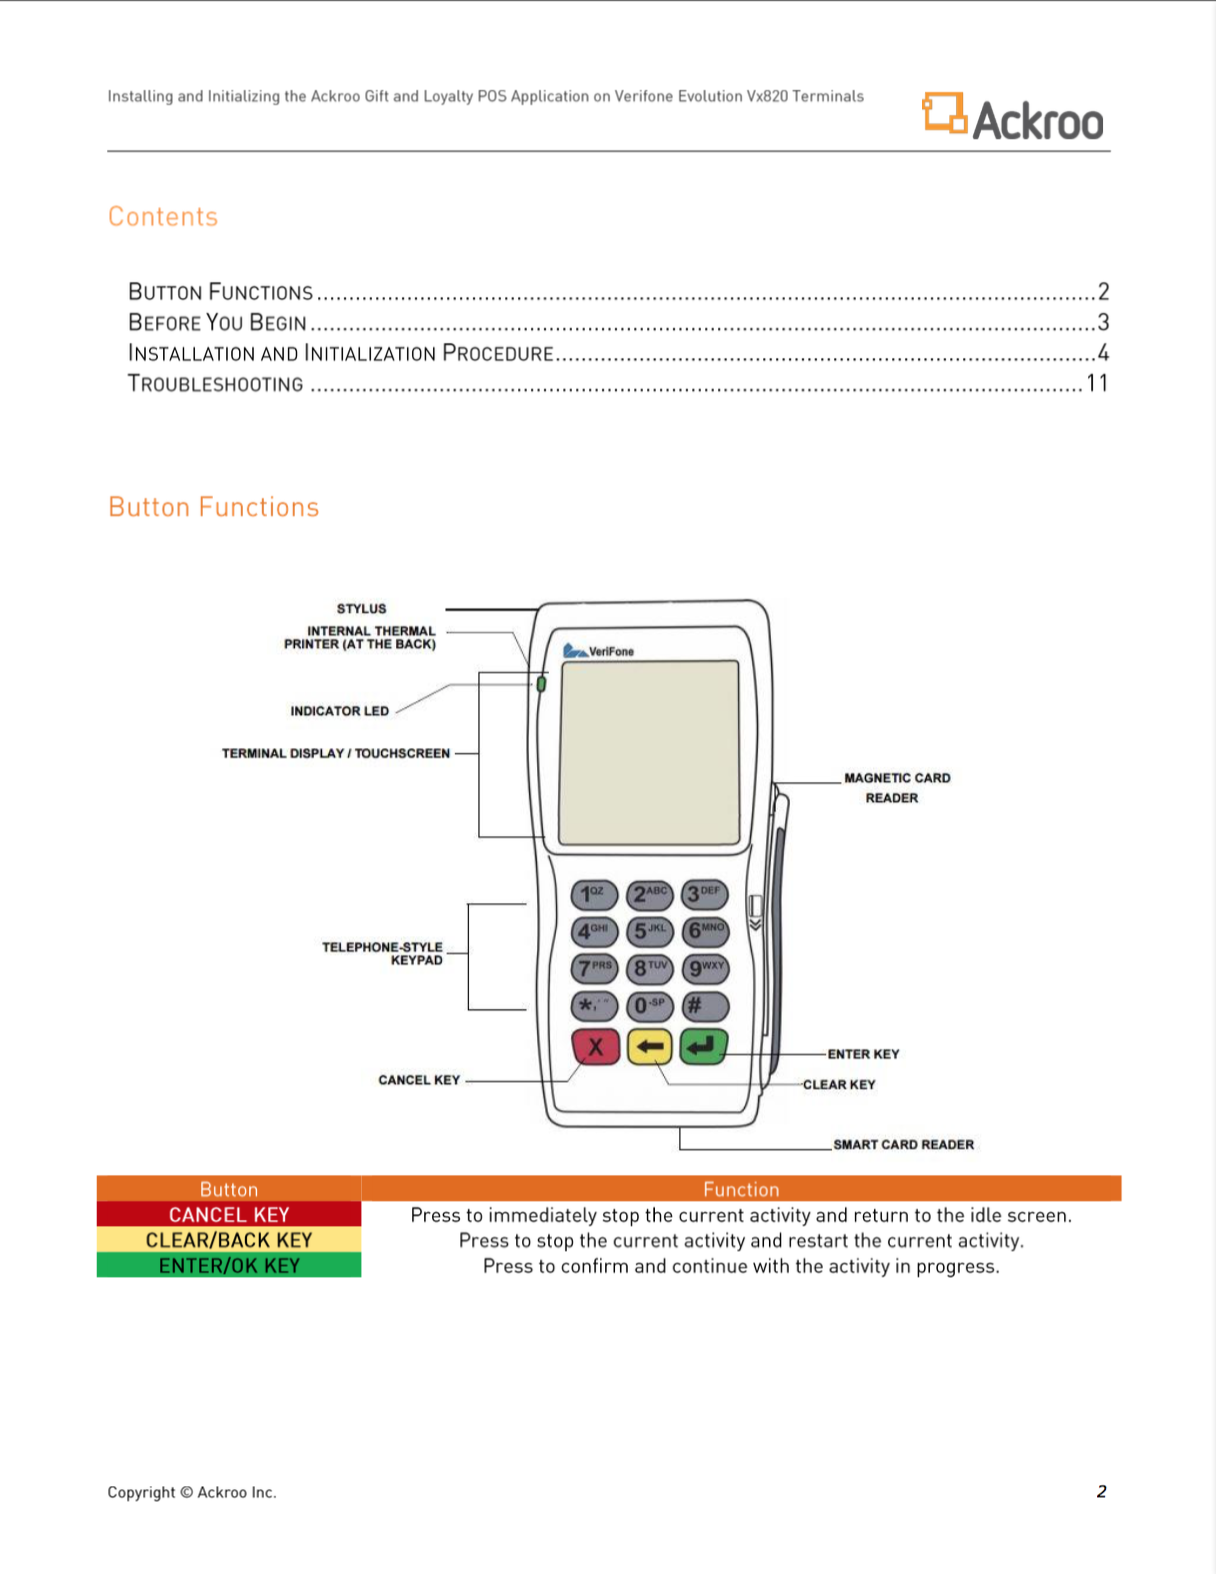 Verifone_Evolution_Vx820_Ackapp_installation_guide_-_Page_2.png